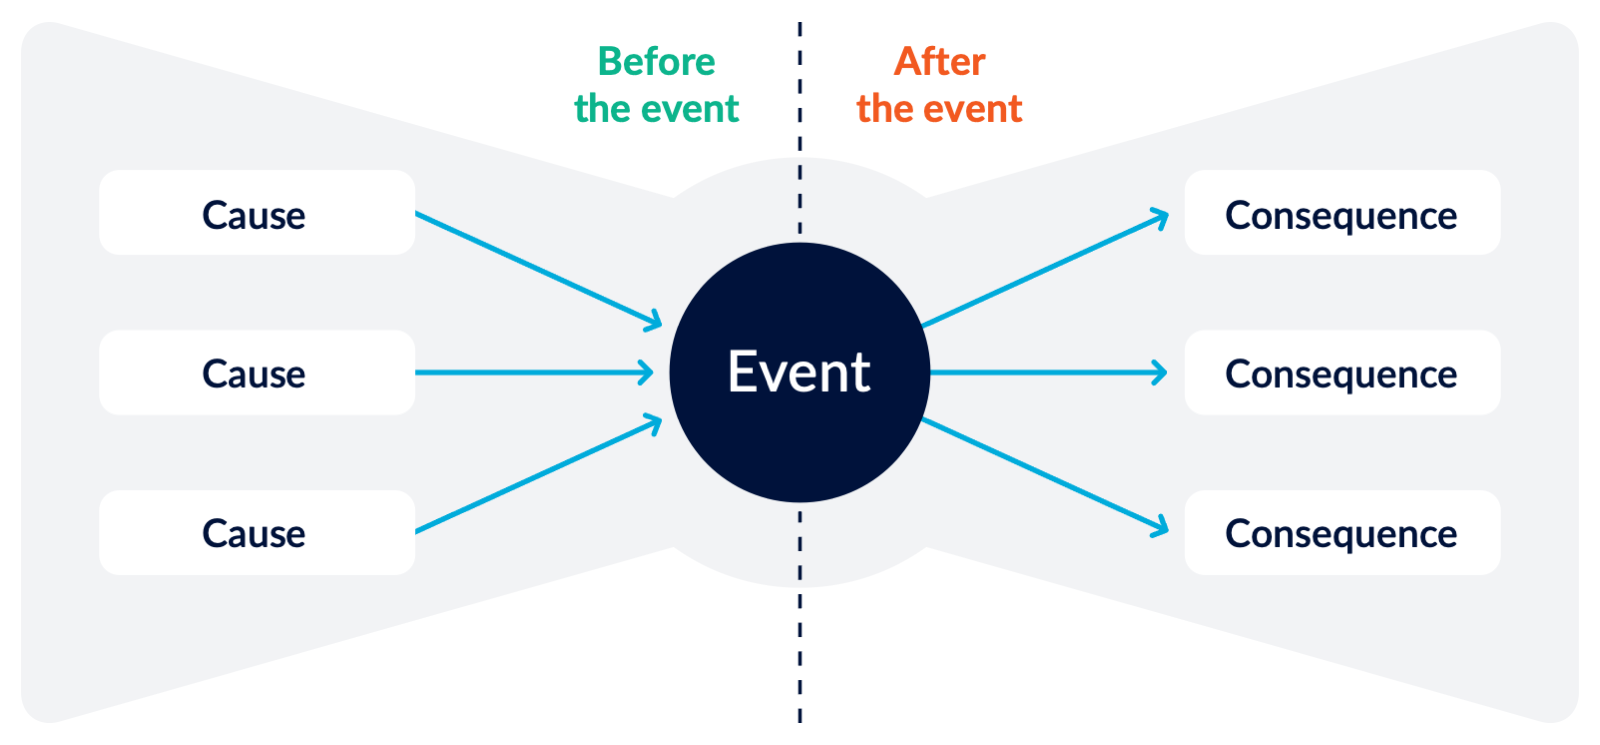 What could cause an event and what could be the consequence?